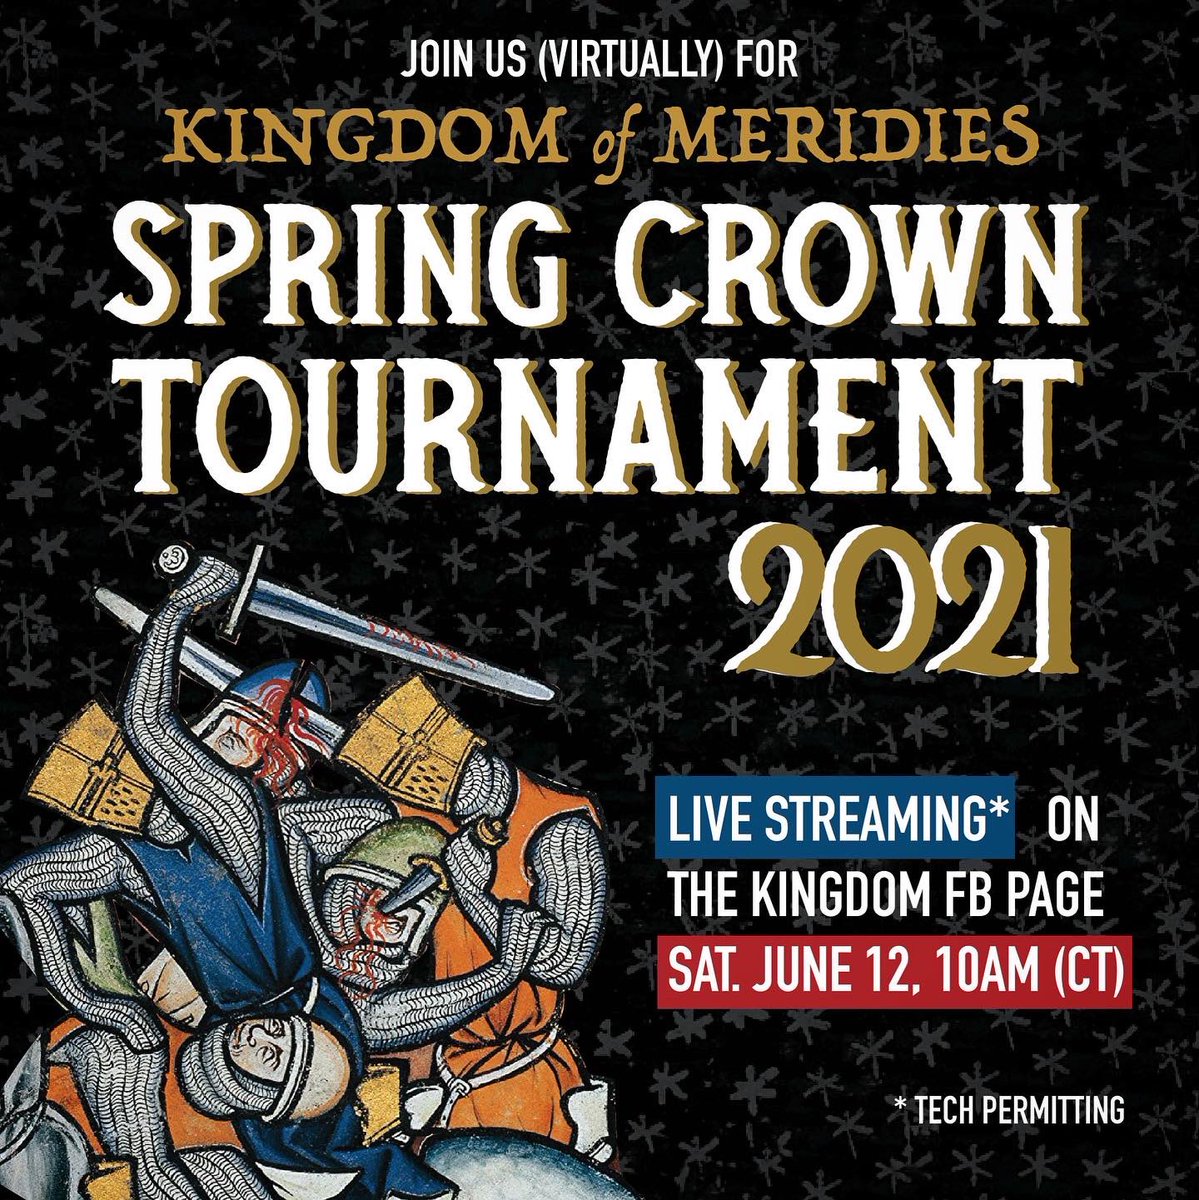 The Kingdom of Meridies Crown Tournament is this weekend. Tune in on FB 10am CT to watch fights for the throne! #sca #virtualsca #kingdomofmeridies #SwordFight